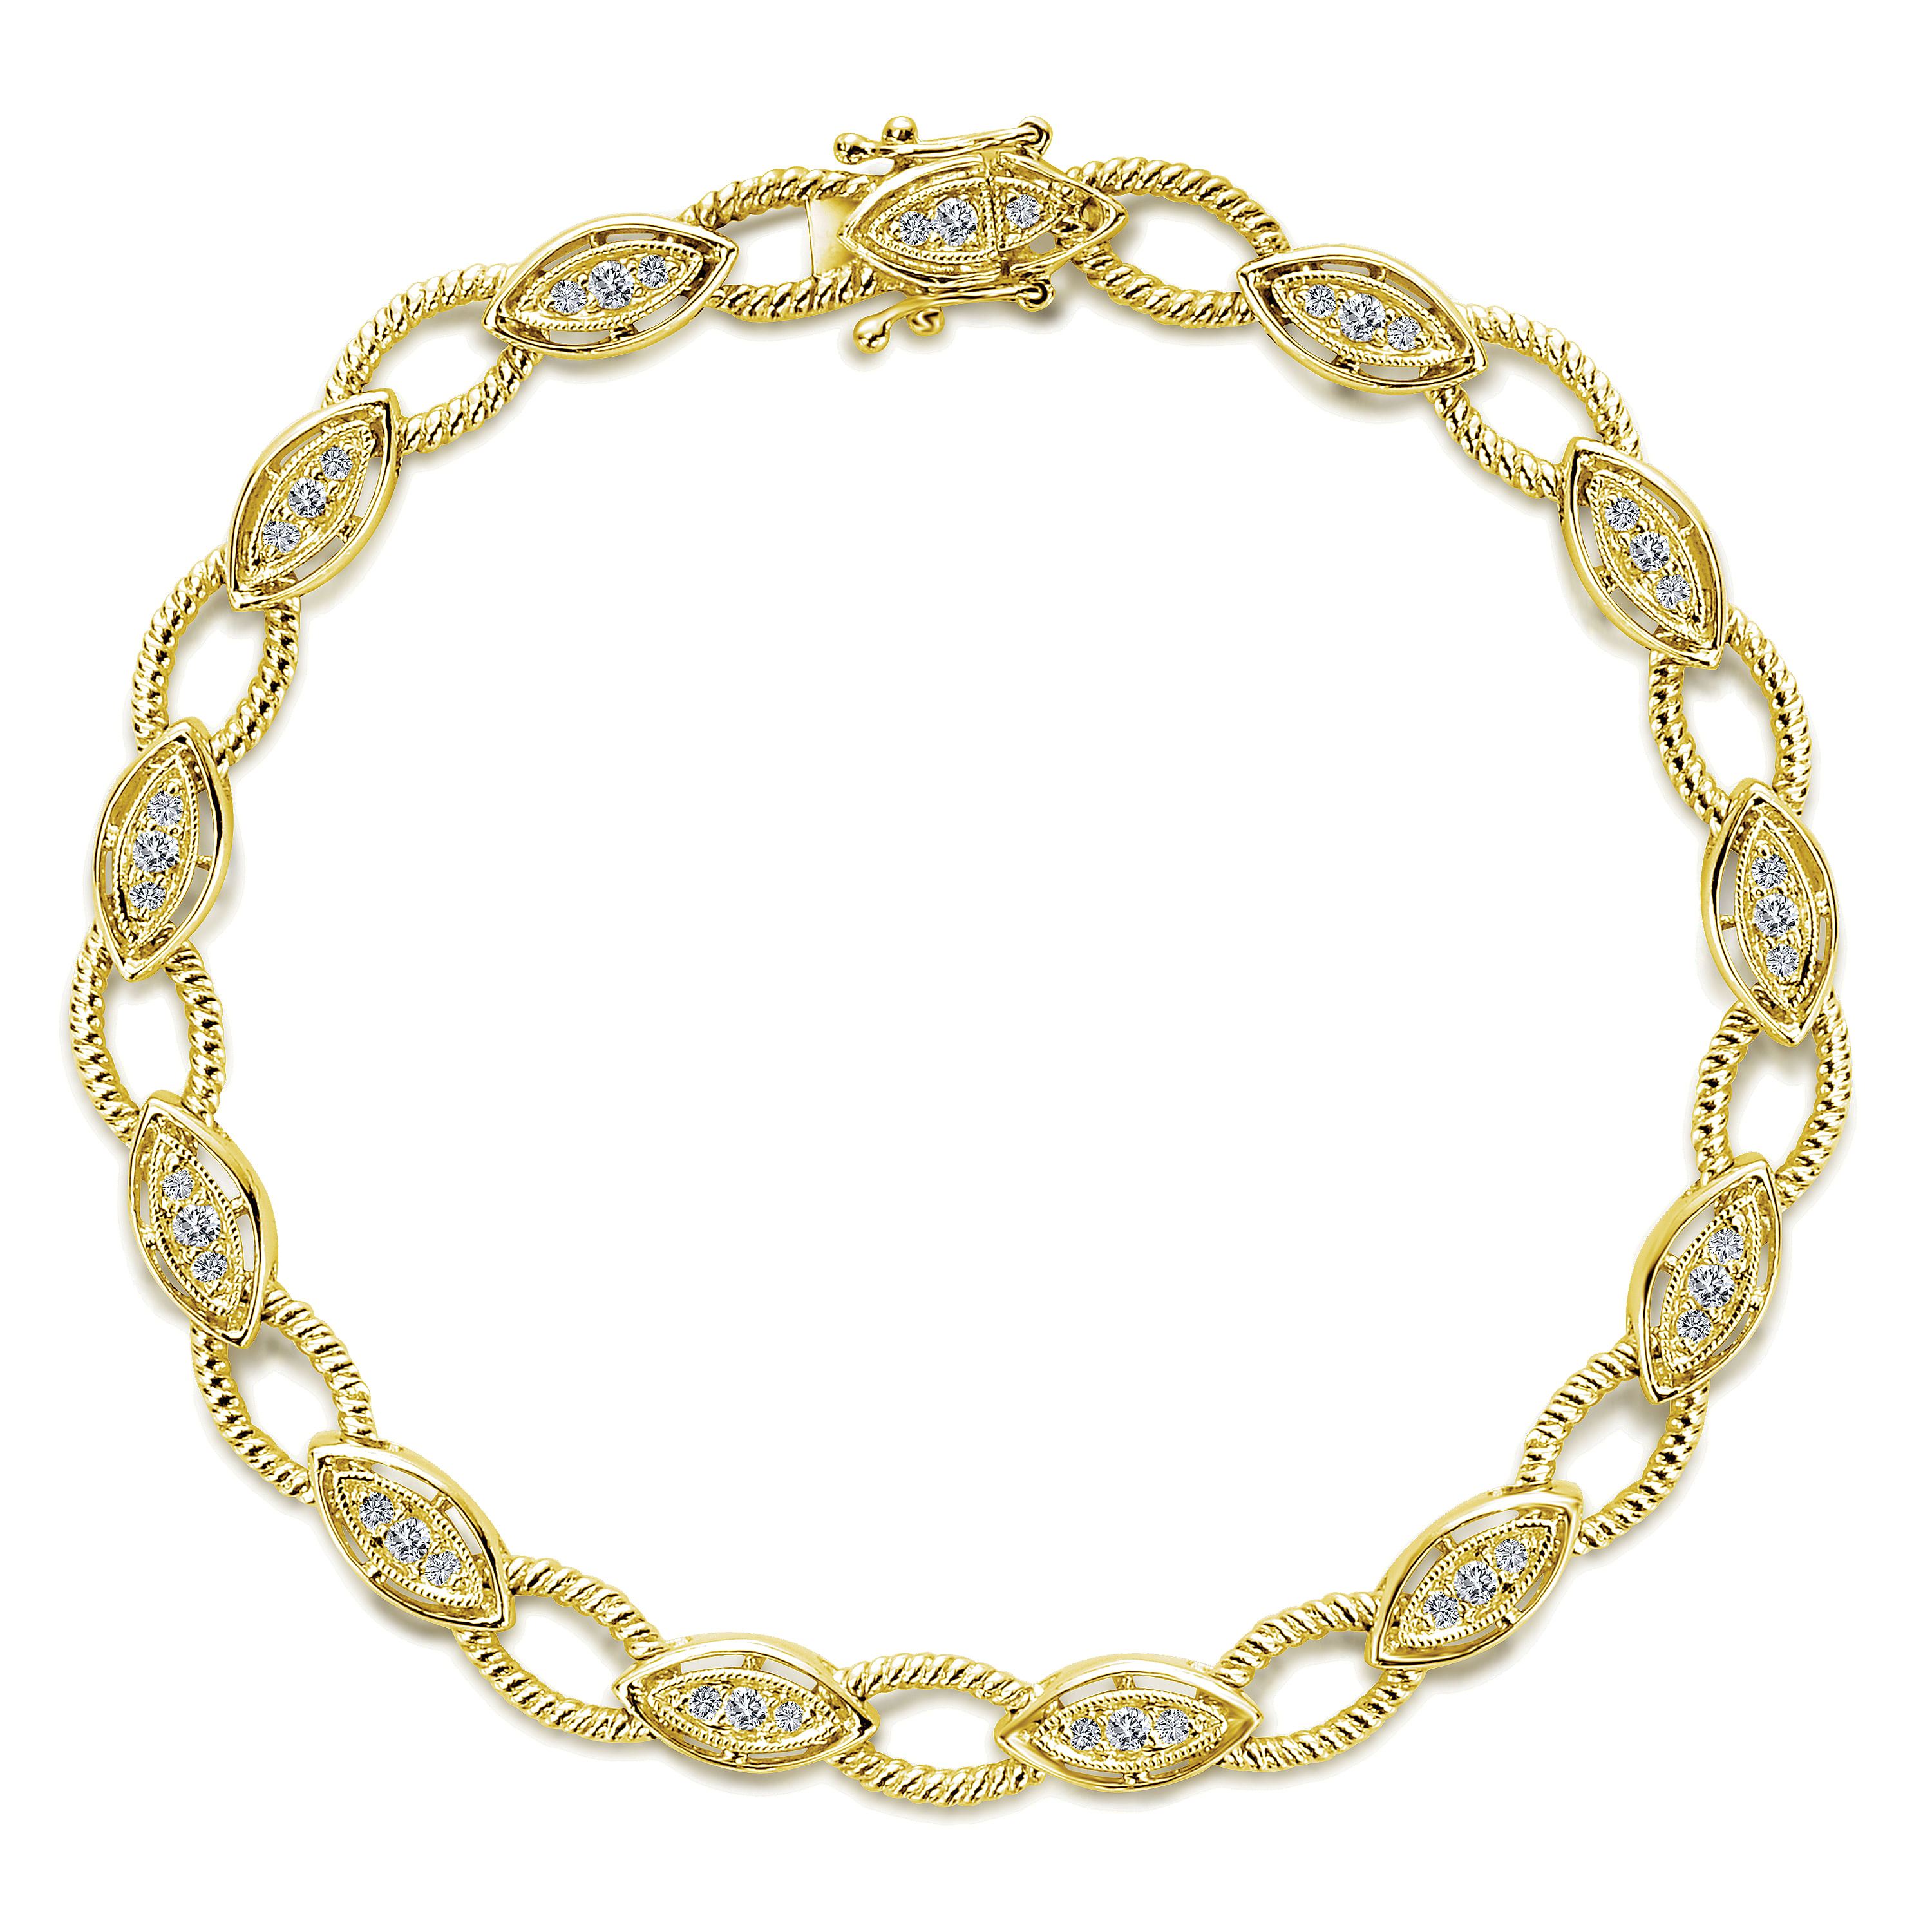 14K Yellow Gold Diamond Tennis Bracelet with Twisted Rope Links